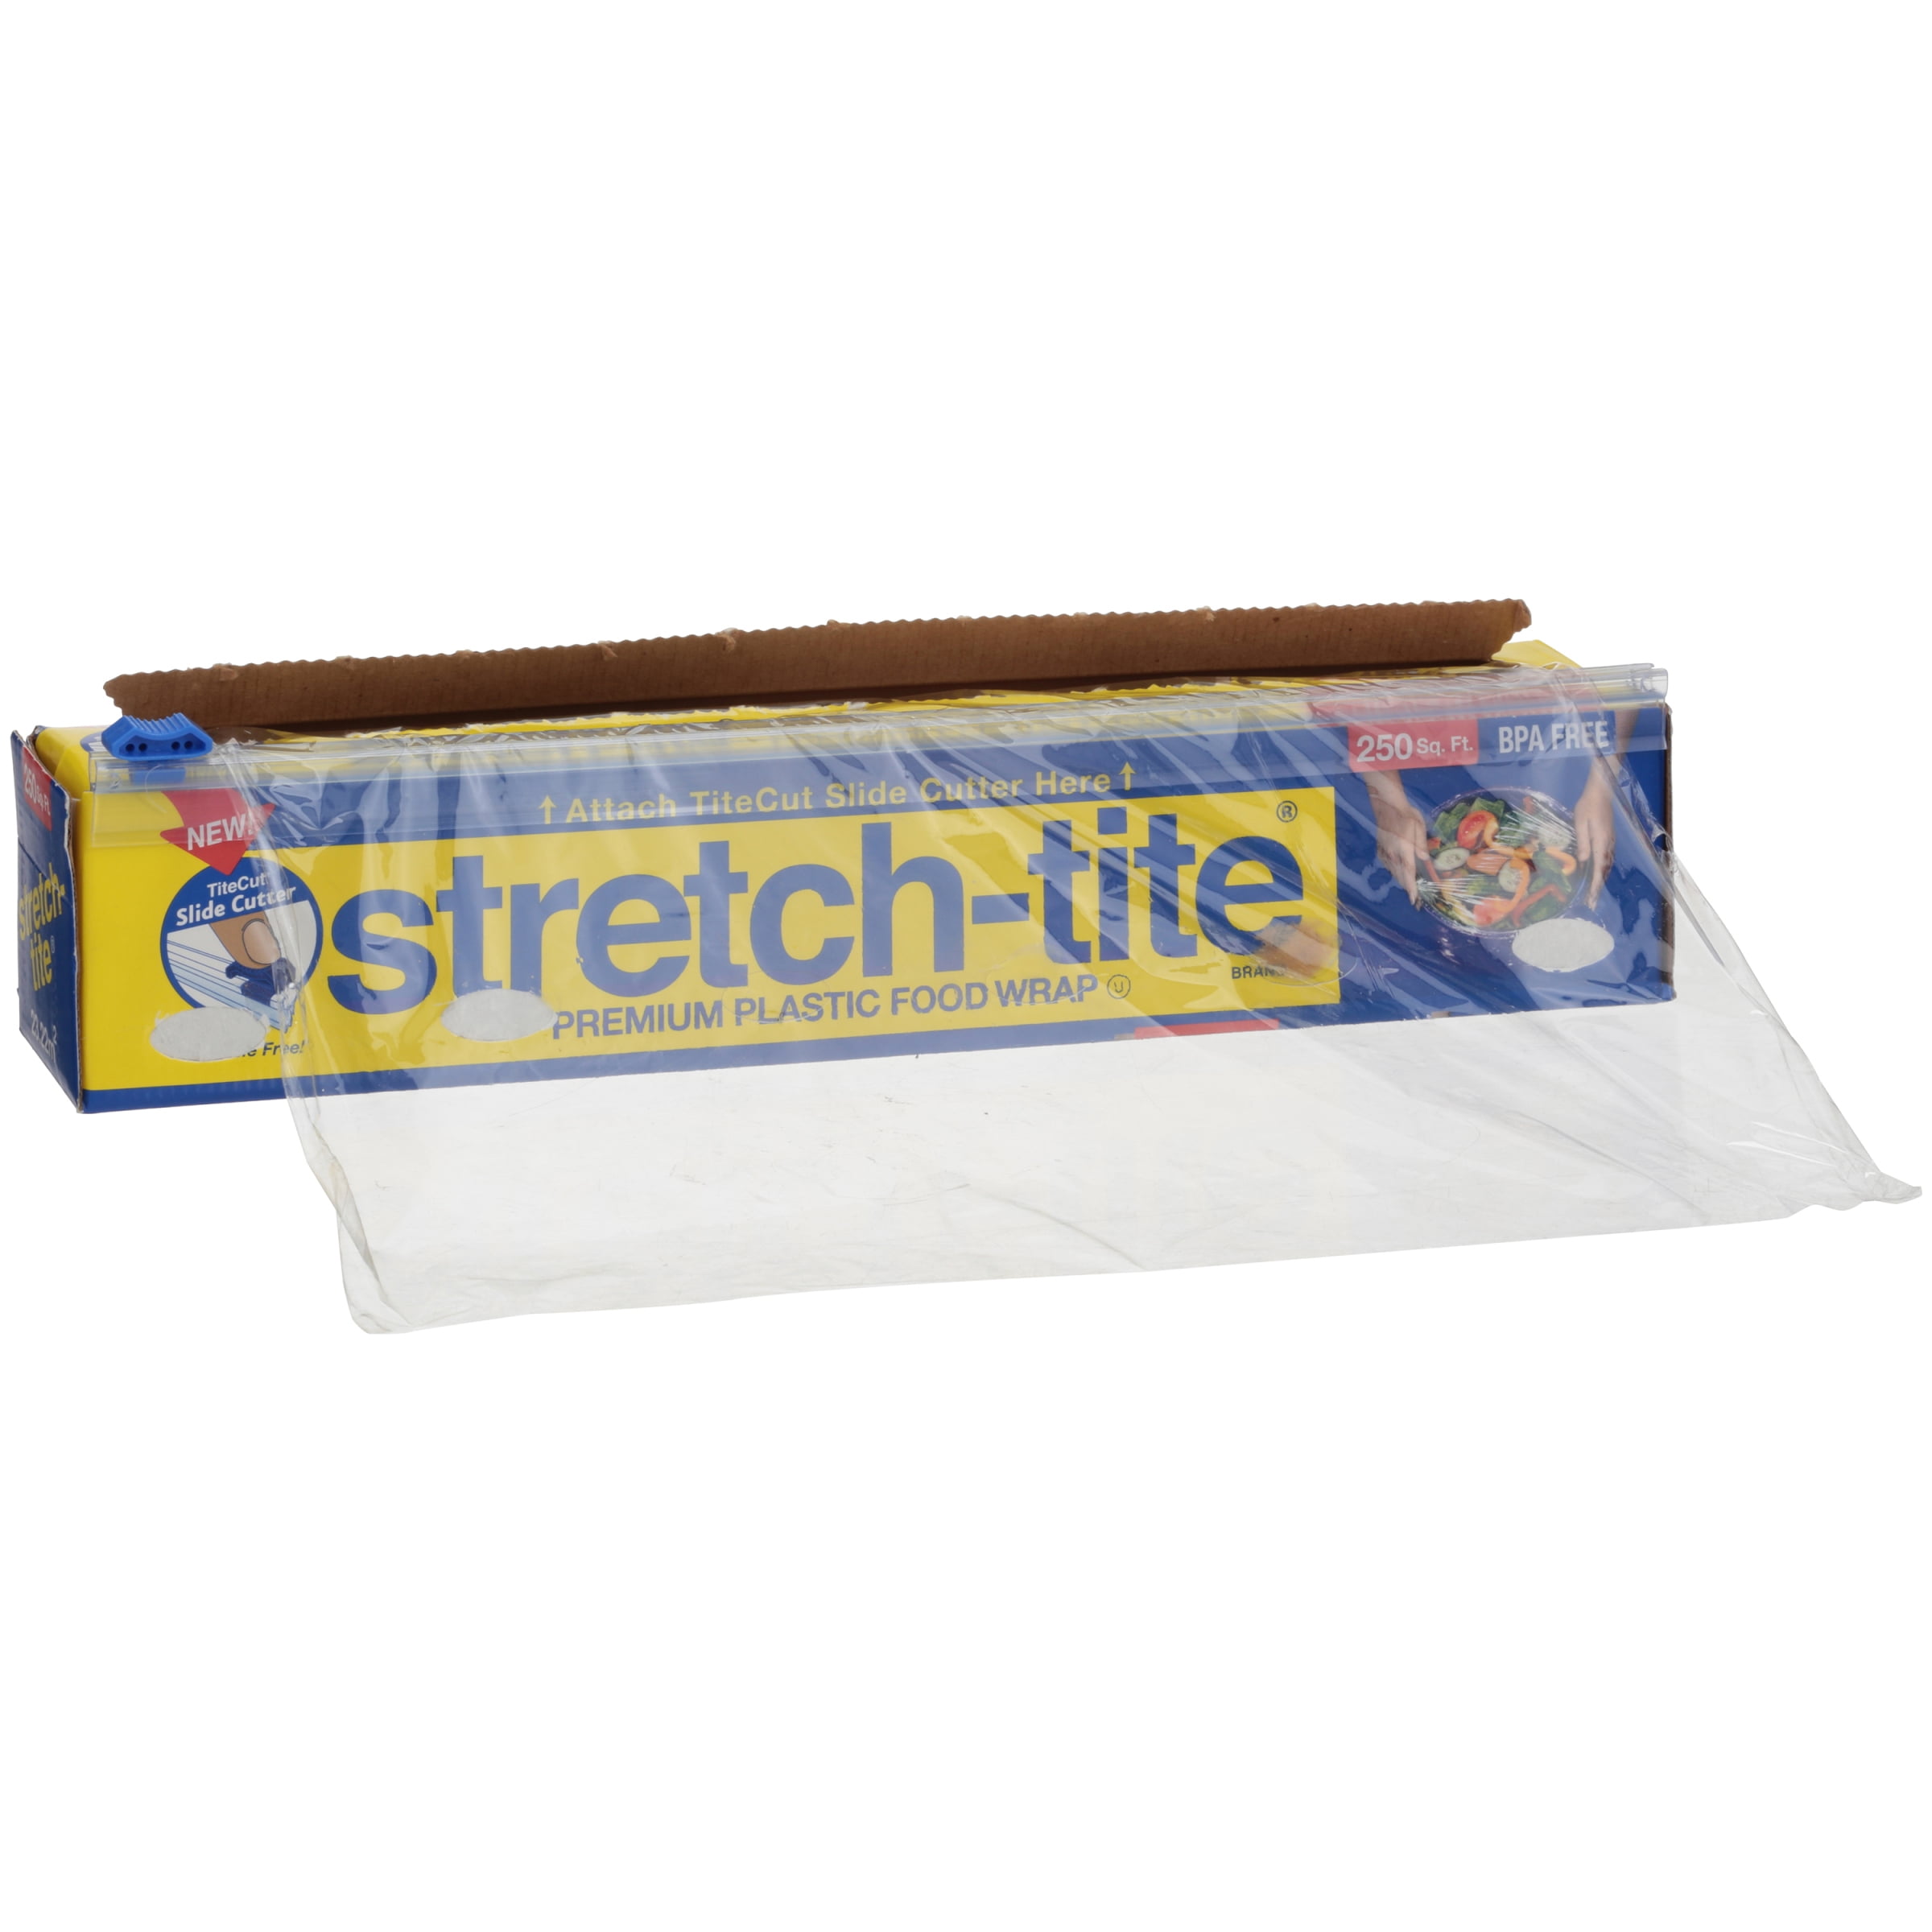 Stretch-Tite Premium Food Wrap with Ticket Slide Cutter, 12 x 250', 250  Square Feet